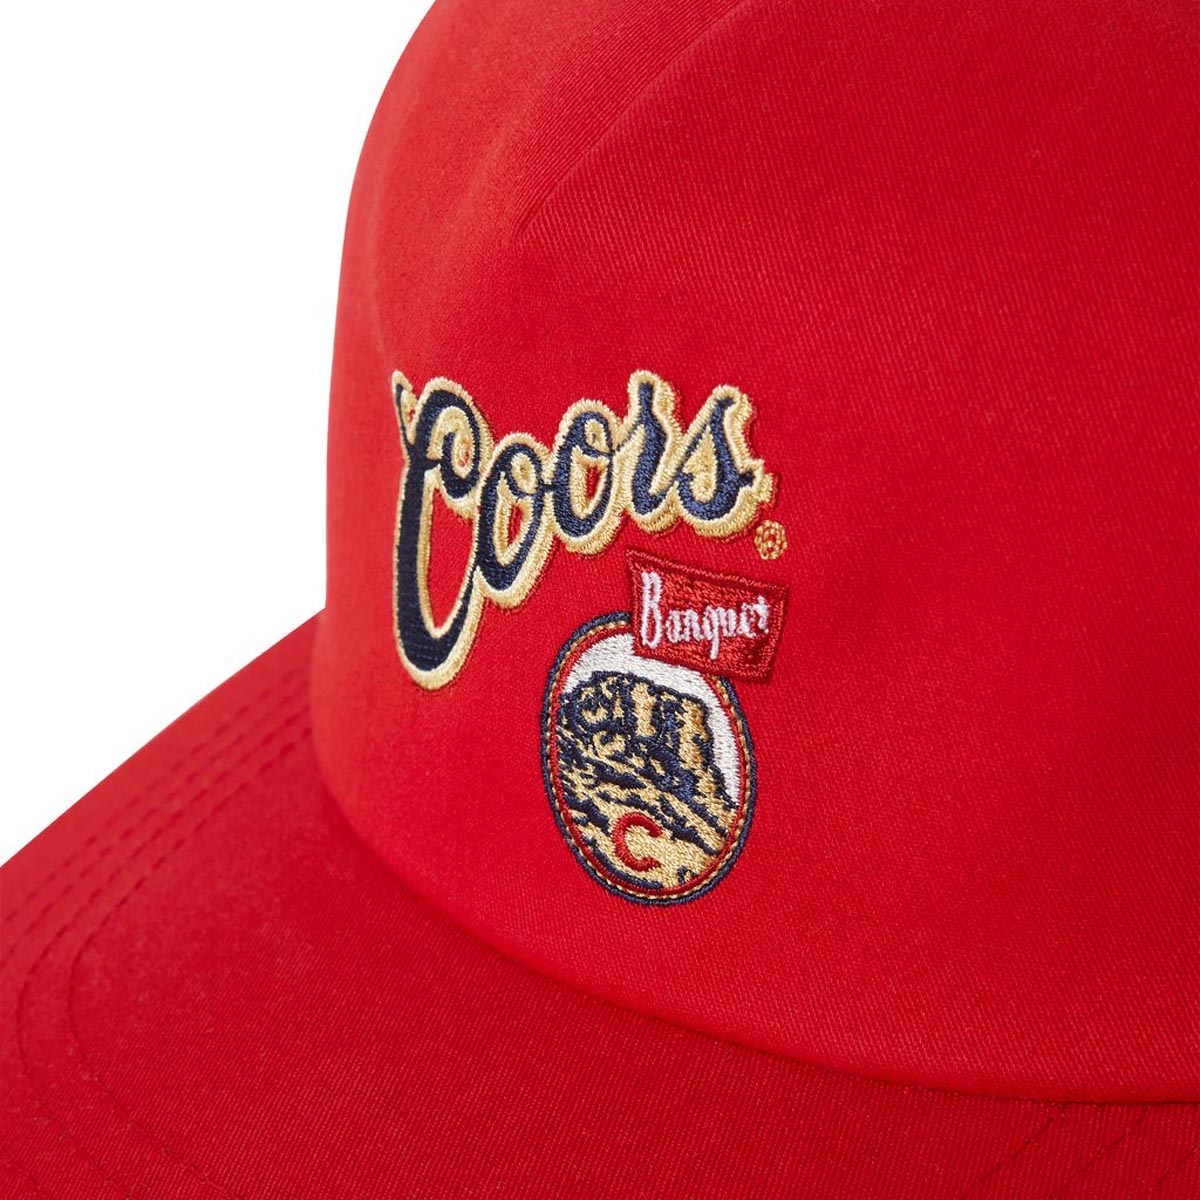 Brixton x Coors Banquet Hops Snapback Hat - Red image 3